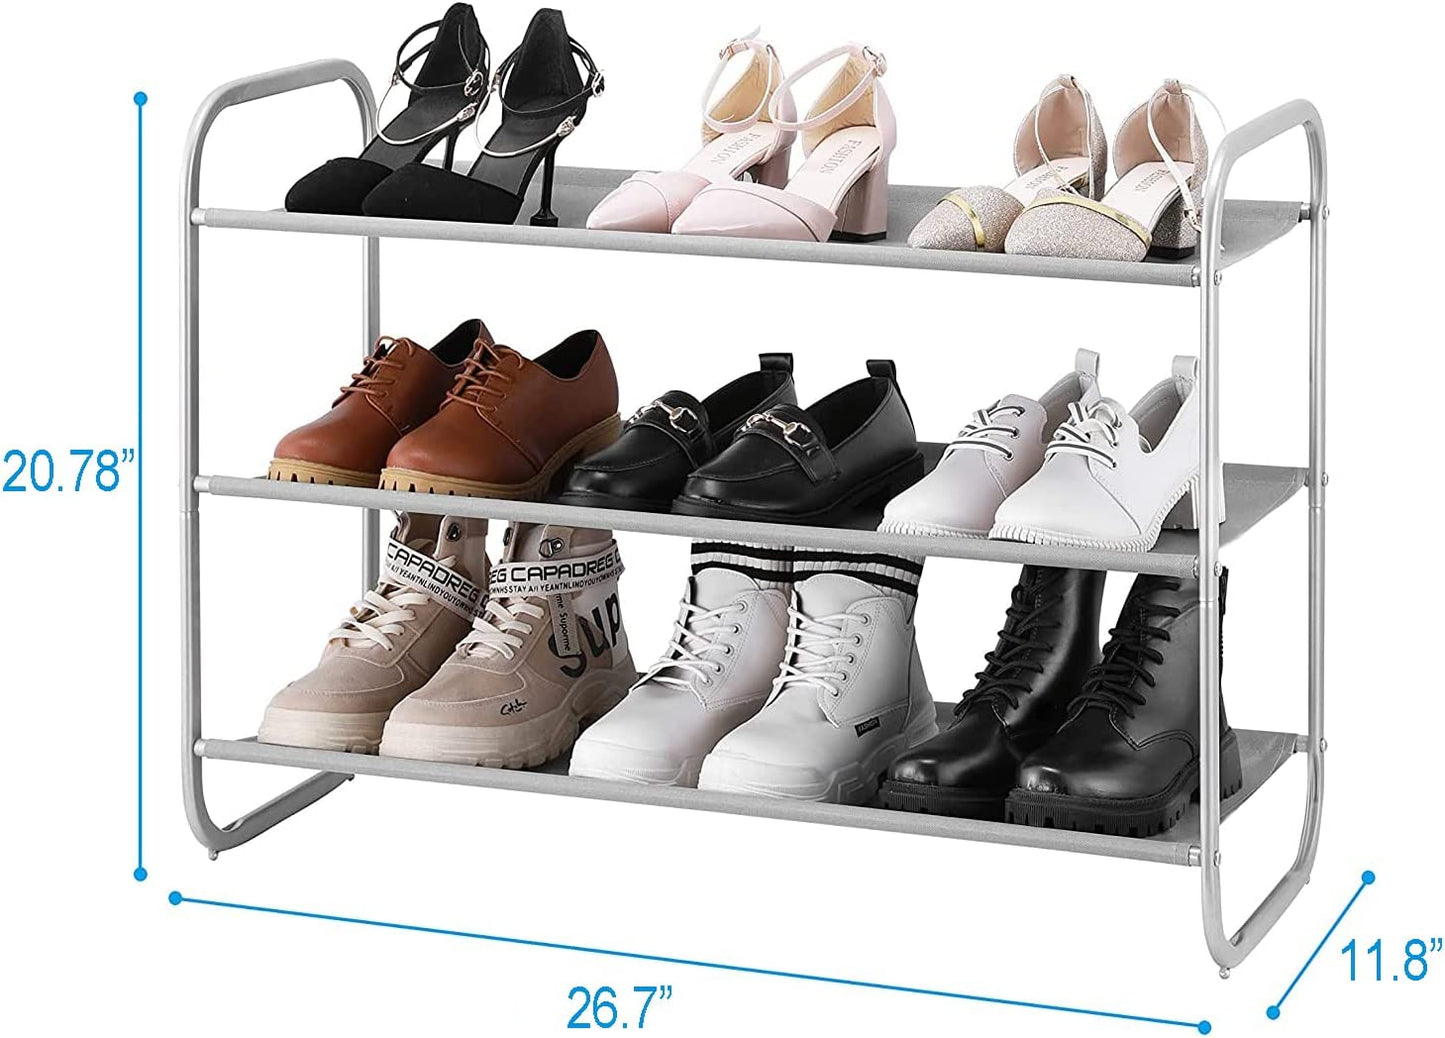 3-Tier Shoe Rack, Fabric Shoe ShelfHome Harmony EssentialsHome Harmony EssentialsHome Decor
Extra Storage: This shoe rack can provide extra storage space for shoes scattered on the floor and keep the room tidy. Its size is 26.7 x 11.8 x 20.78 inches, and e3-Tier Shoe Rack, Fabric Shoe Shelf for Closet Bedroom Entryway (Light